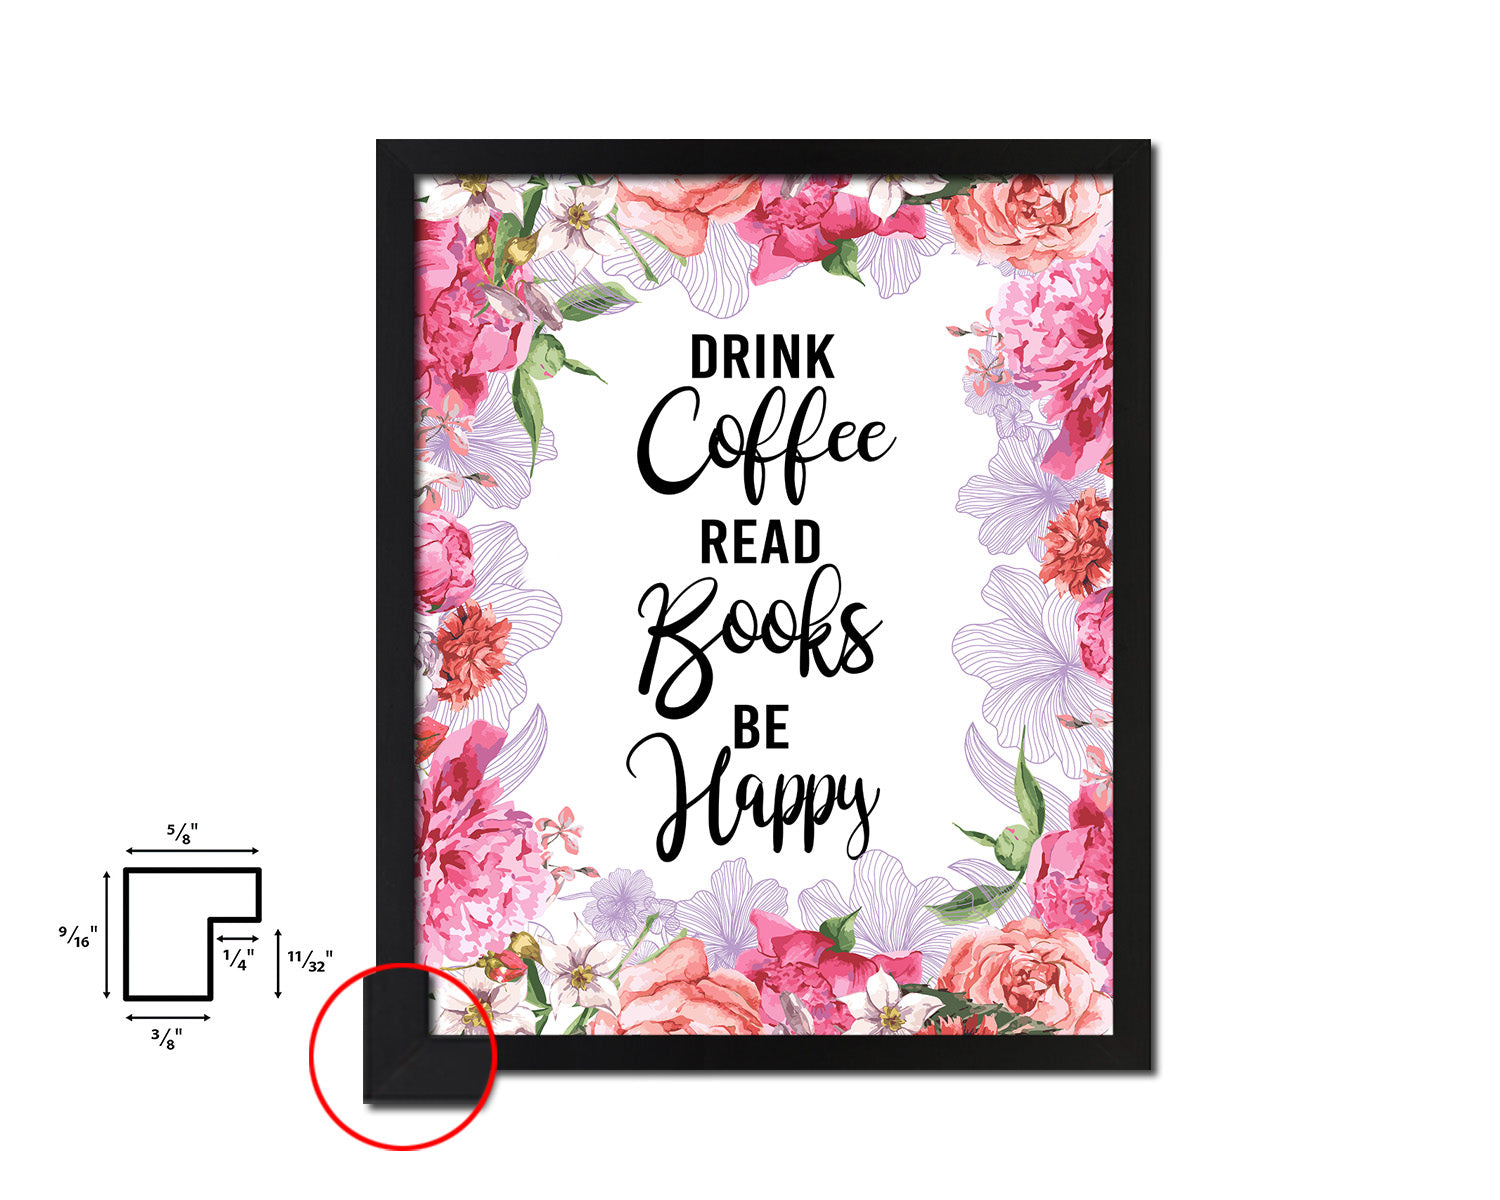 Drink coffee read books be happy Quote Framed Artwork Print Wall Decor Art Gifts